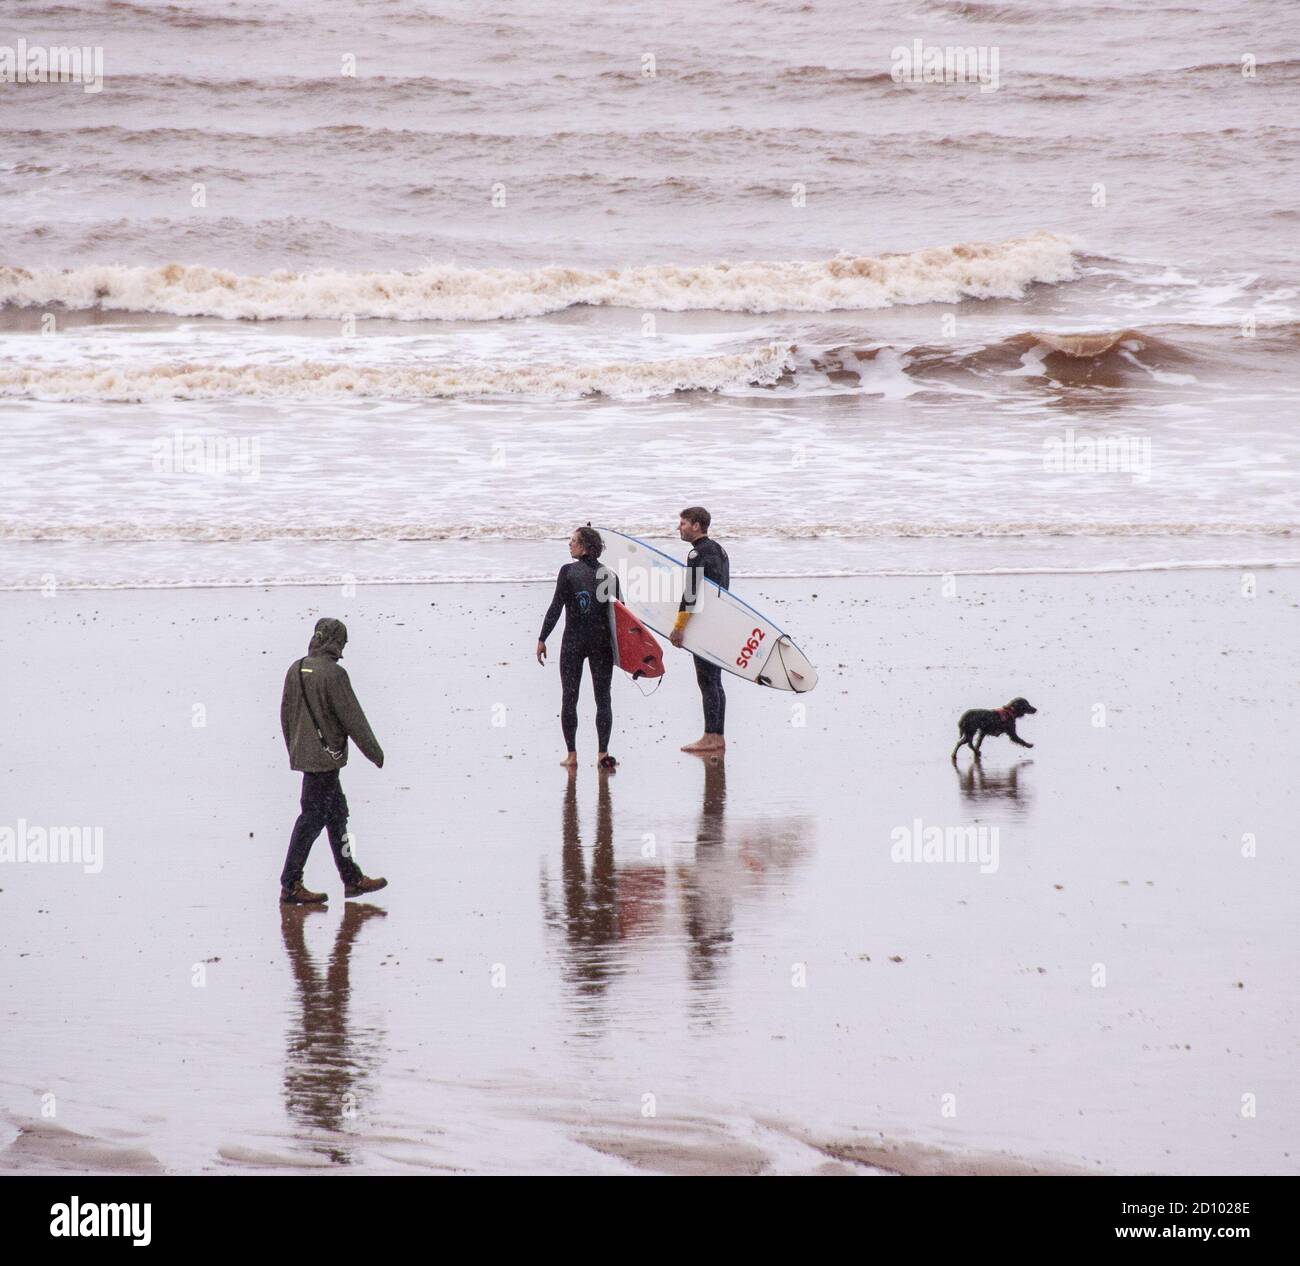 Sidmouth, Devon 4th Oct 2020 With Storm Alex now gone, surfers prepare to head out into the English Channel at Sidmouth Devon on a cool and rainy Sunday. Credit: Photo Central/Alamy Live News Stock Photo